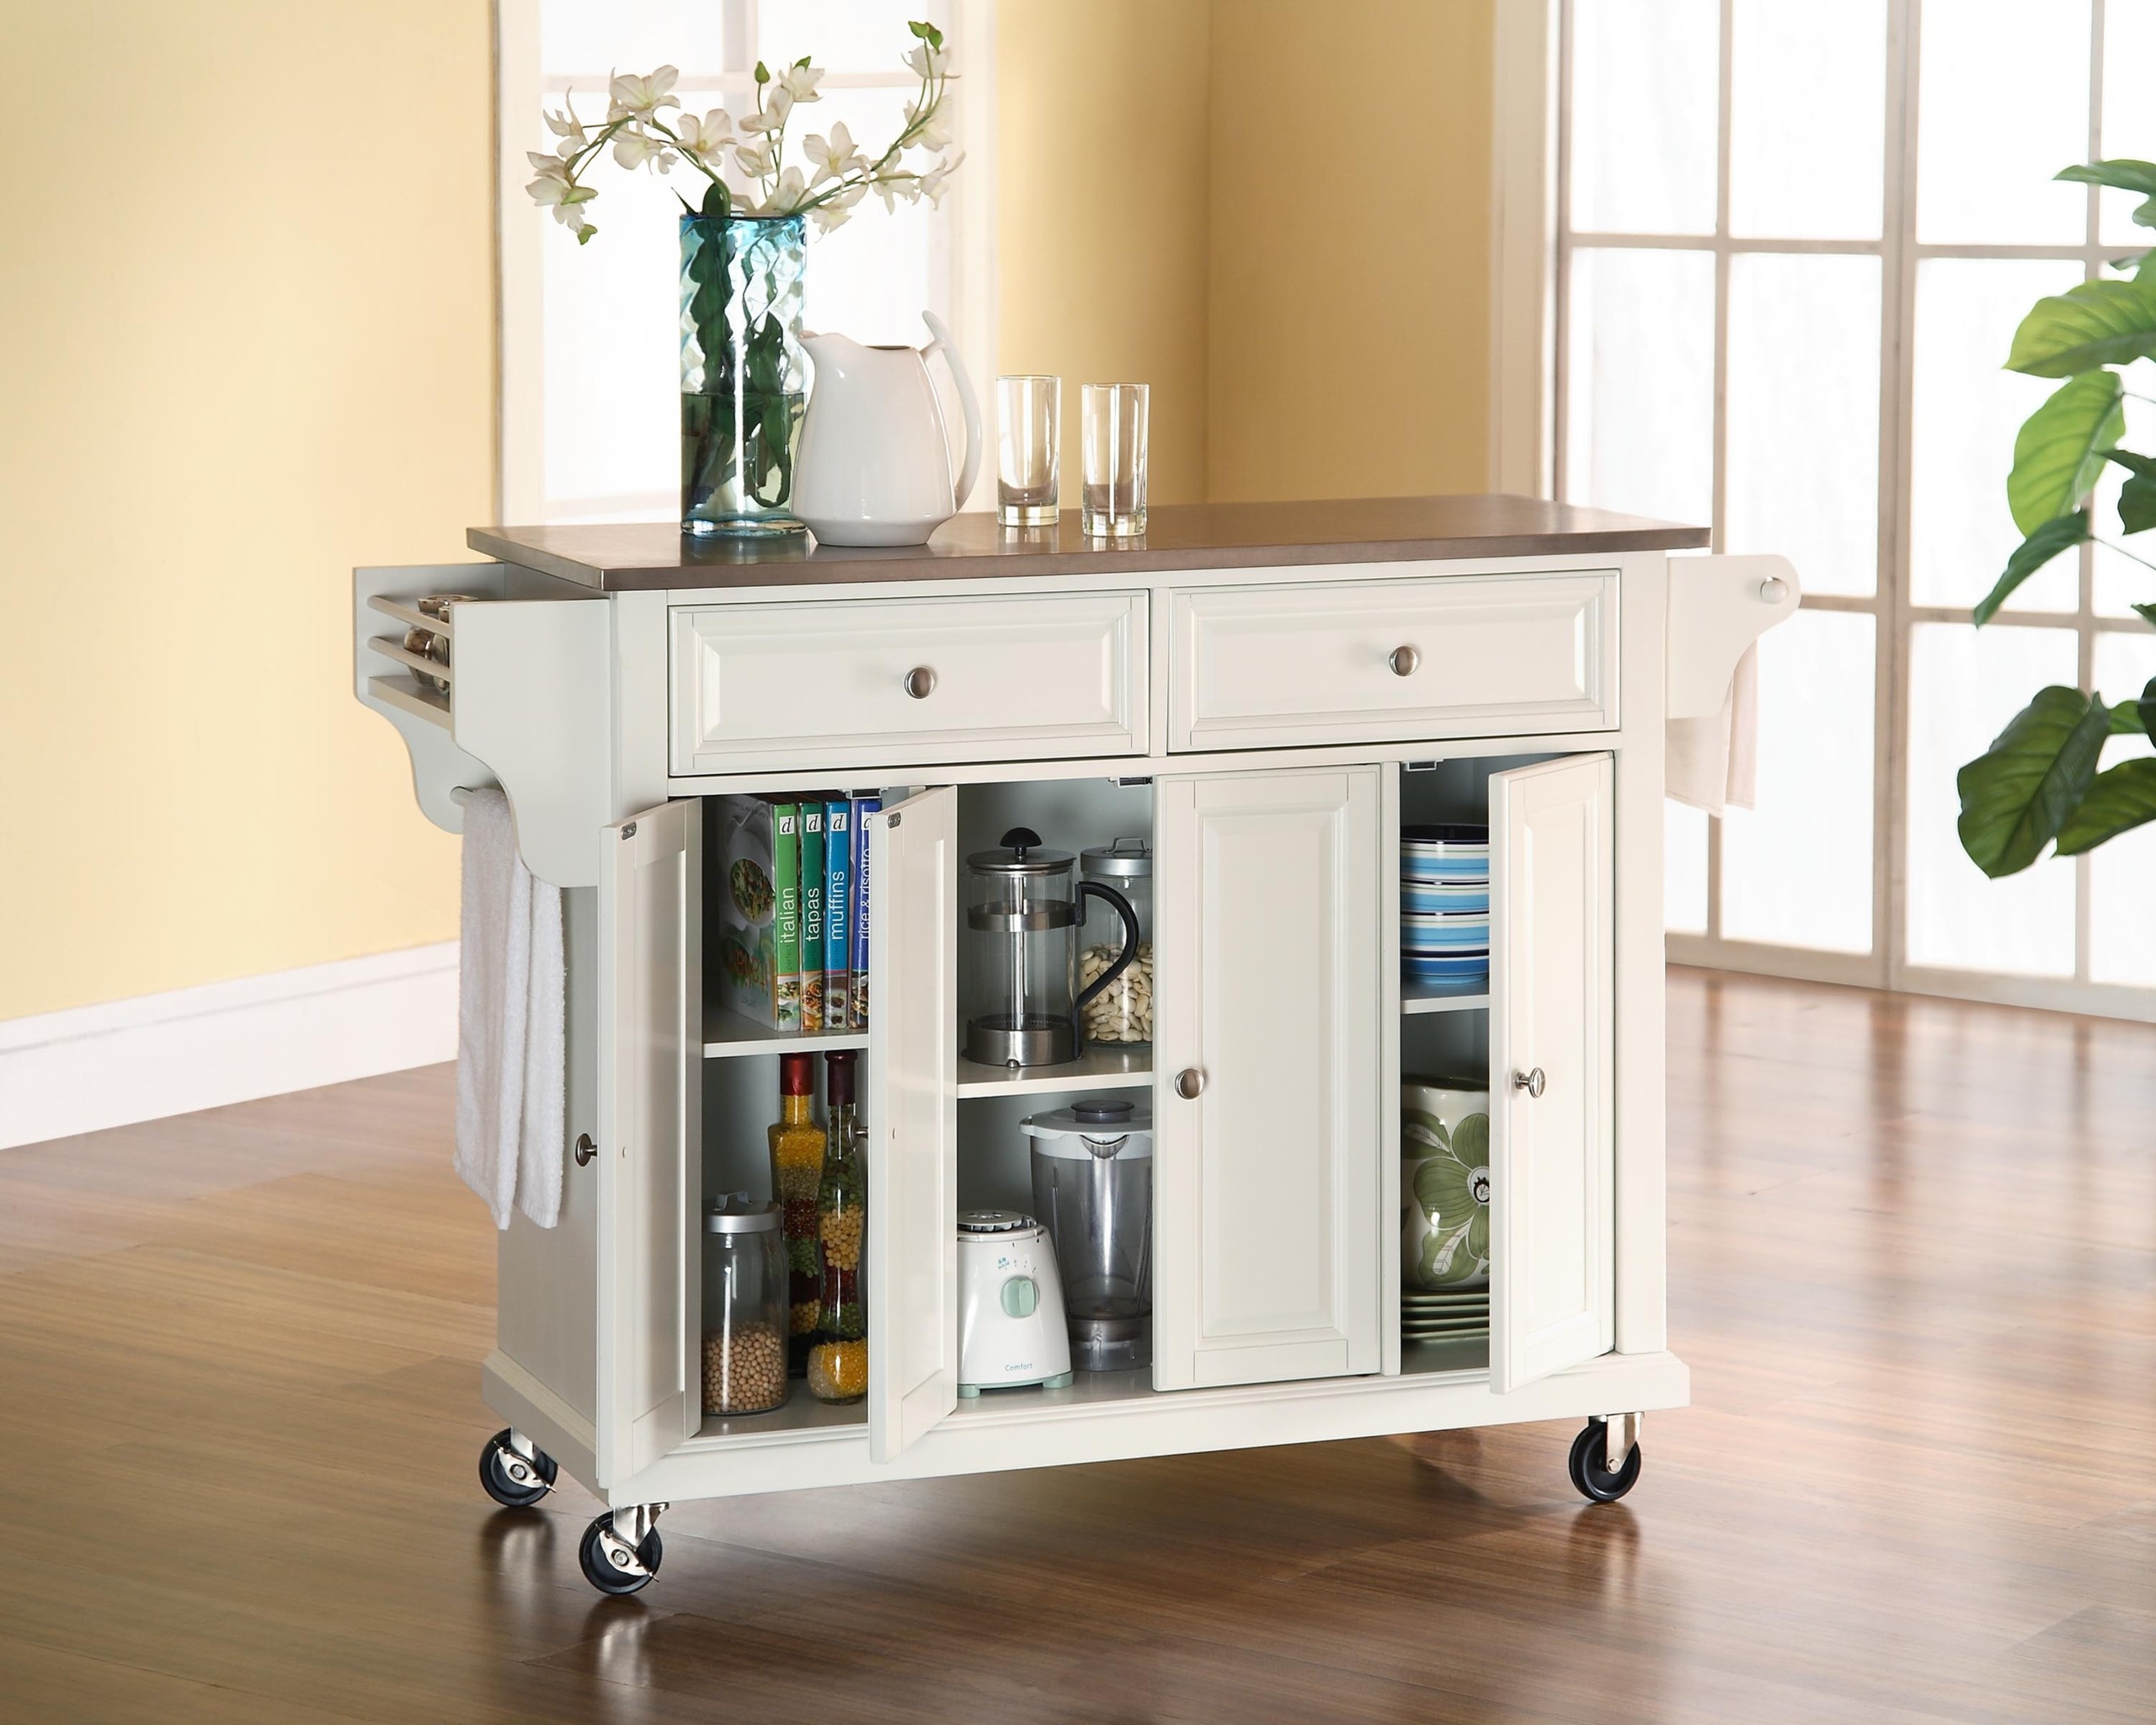 Best kitchen cart ideas with wheel for home needs homesfeed